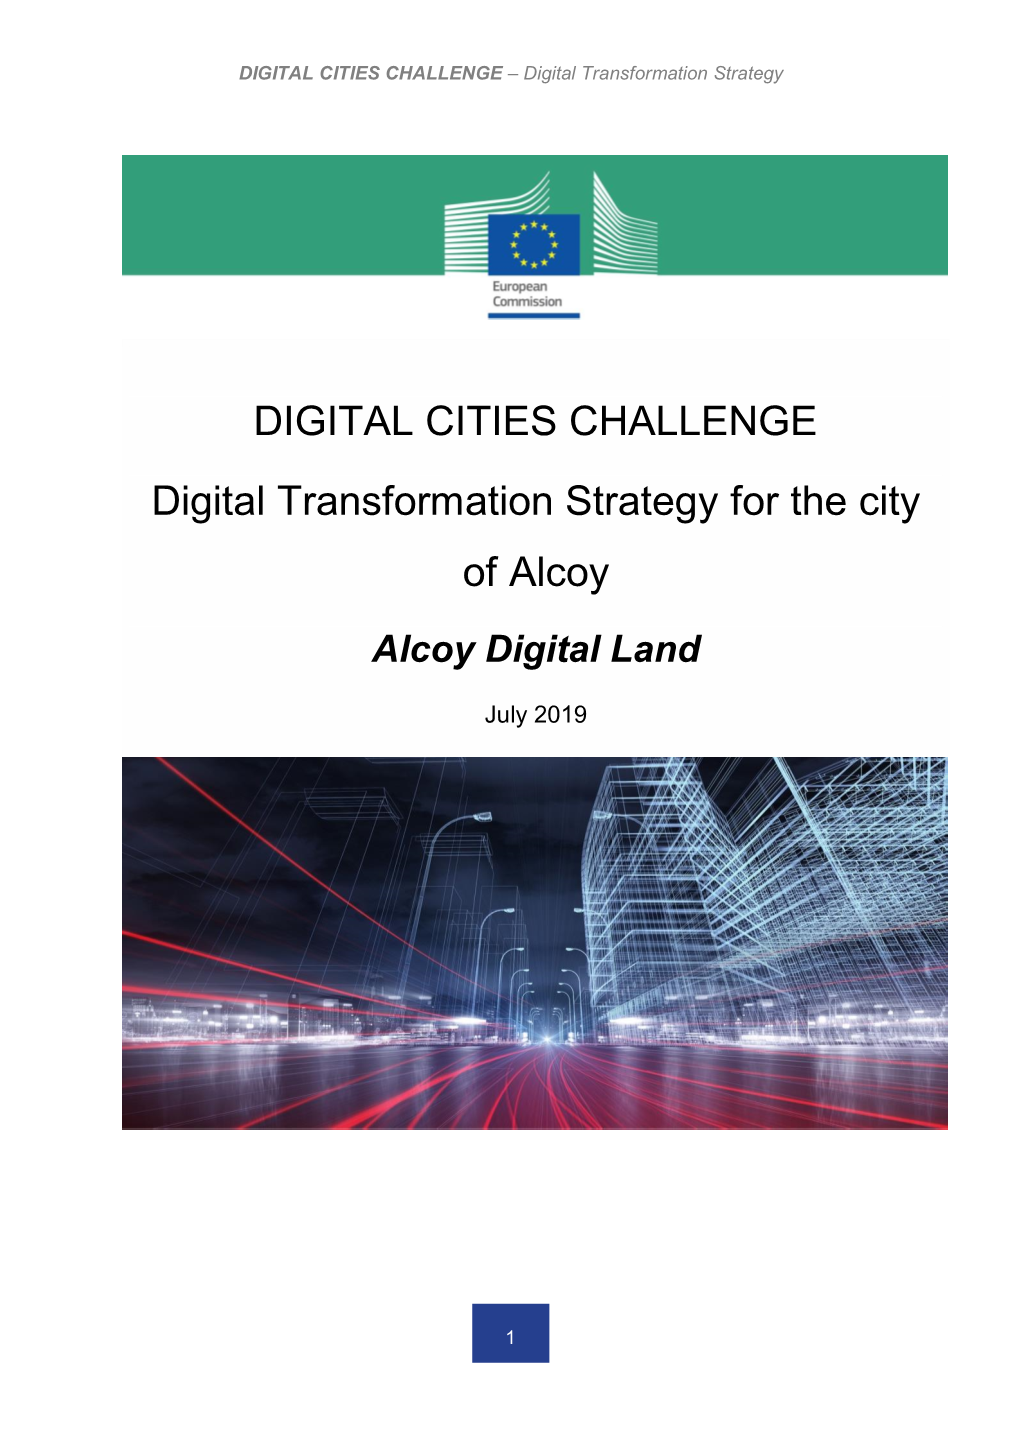 DIGITAL CITIES CHALLENGE Digital Transformation Strategy for the City of Alcoy Alcoy Digital Land